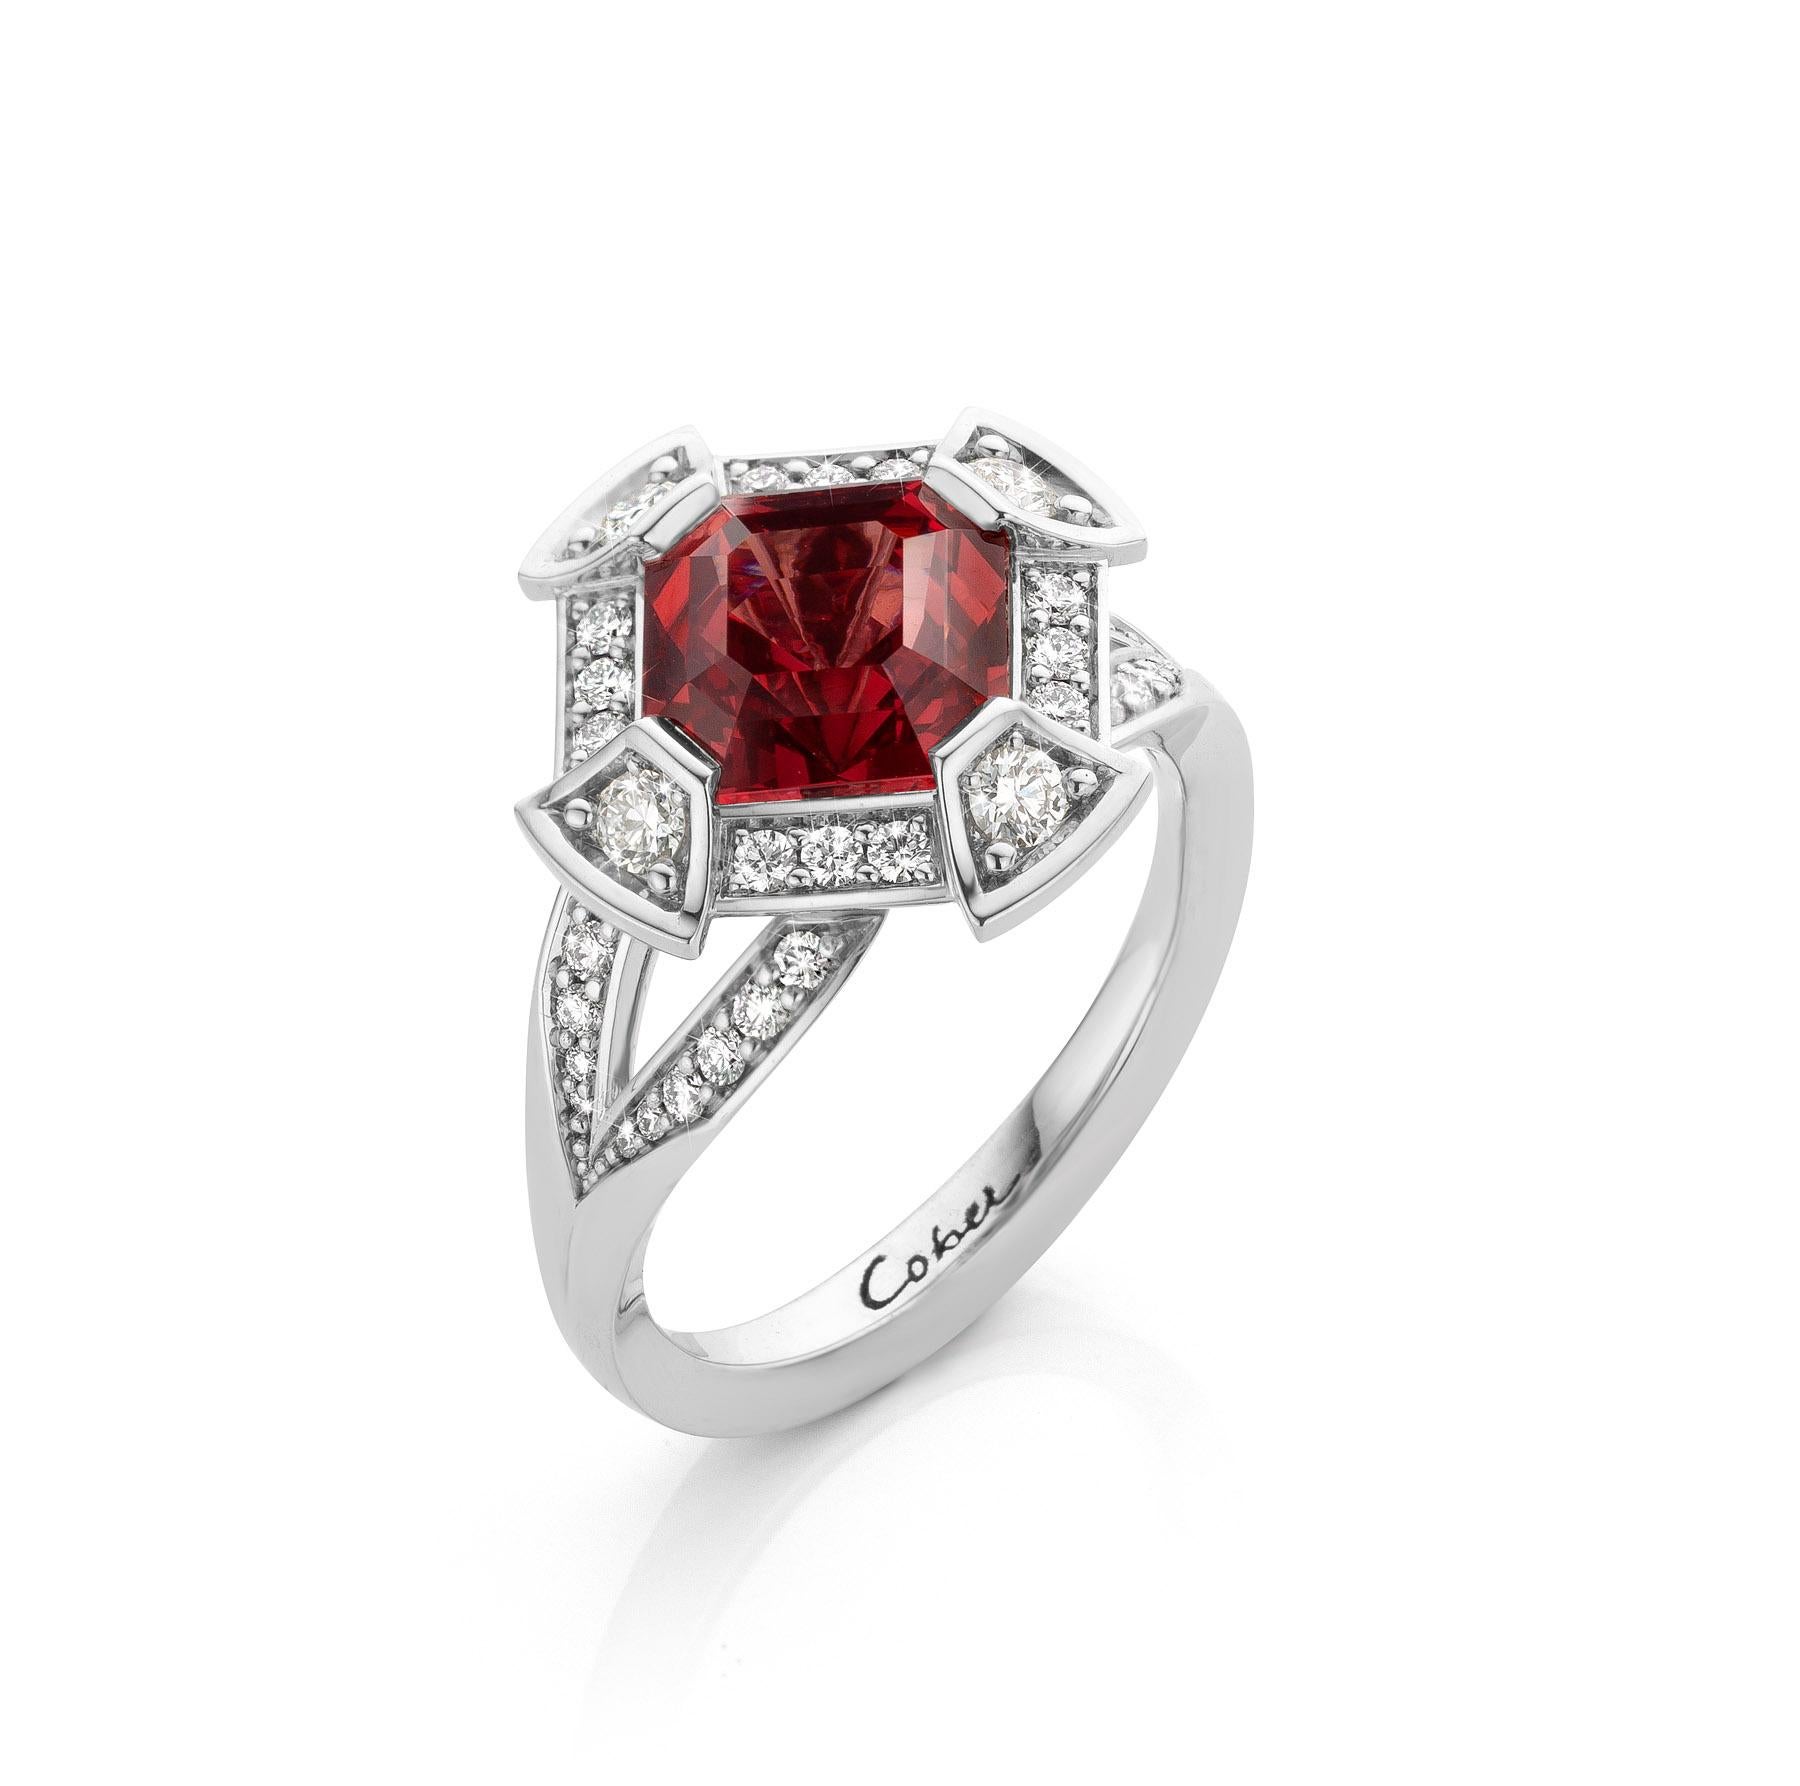 For Sale:  Cober “Stunning Pink” pure Pink Spinel and Diamonds White Gold Cocktail Ring  4